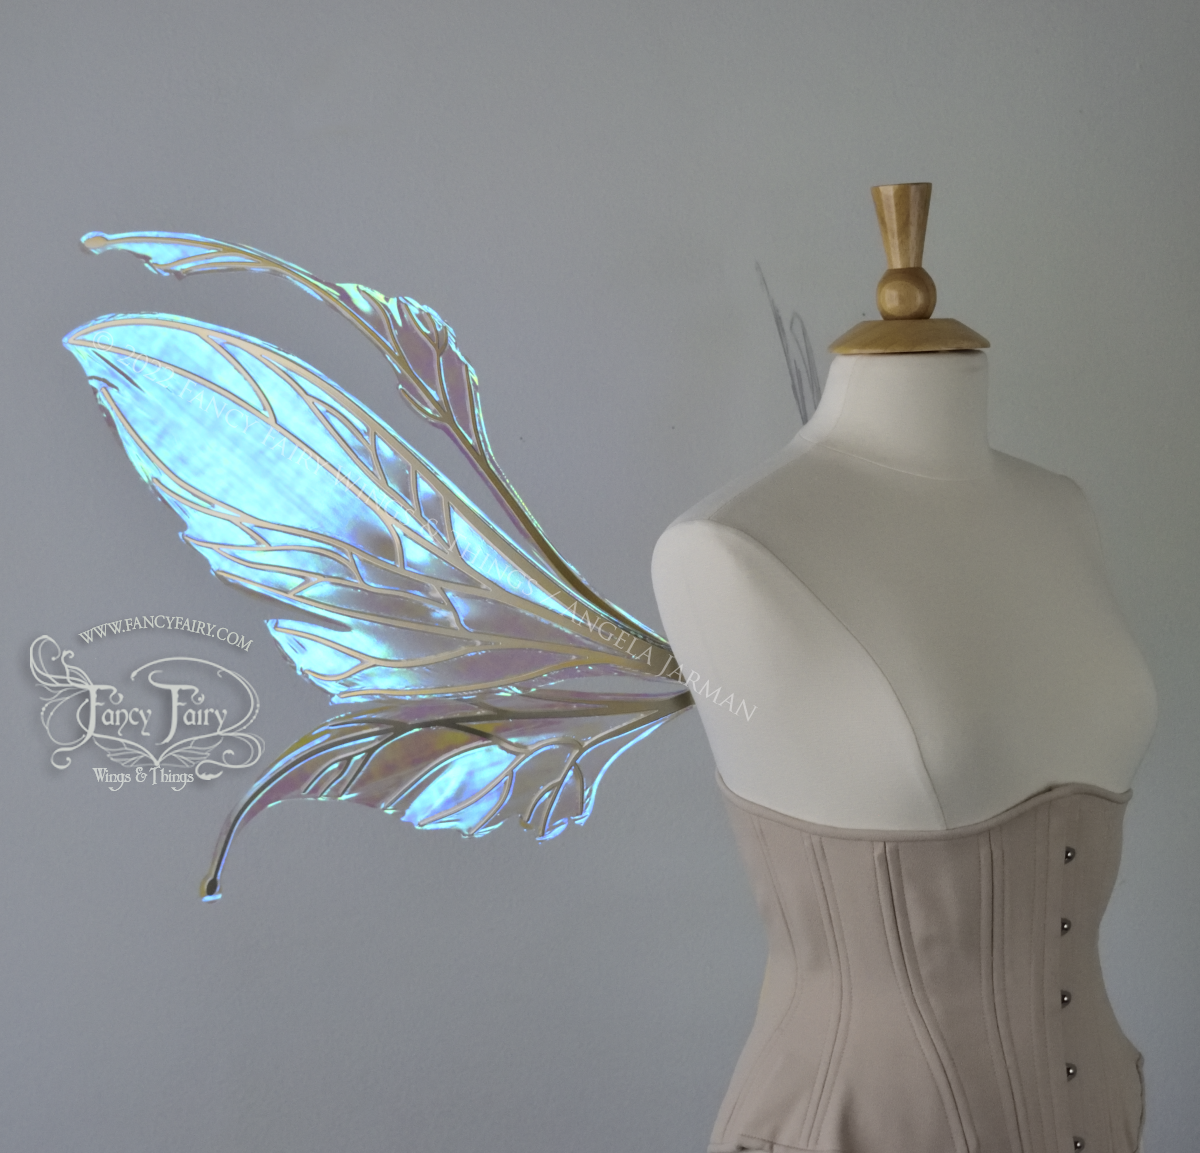 Iridescent fairy wings necklace- Triad with opalite - Geek and Artsy